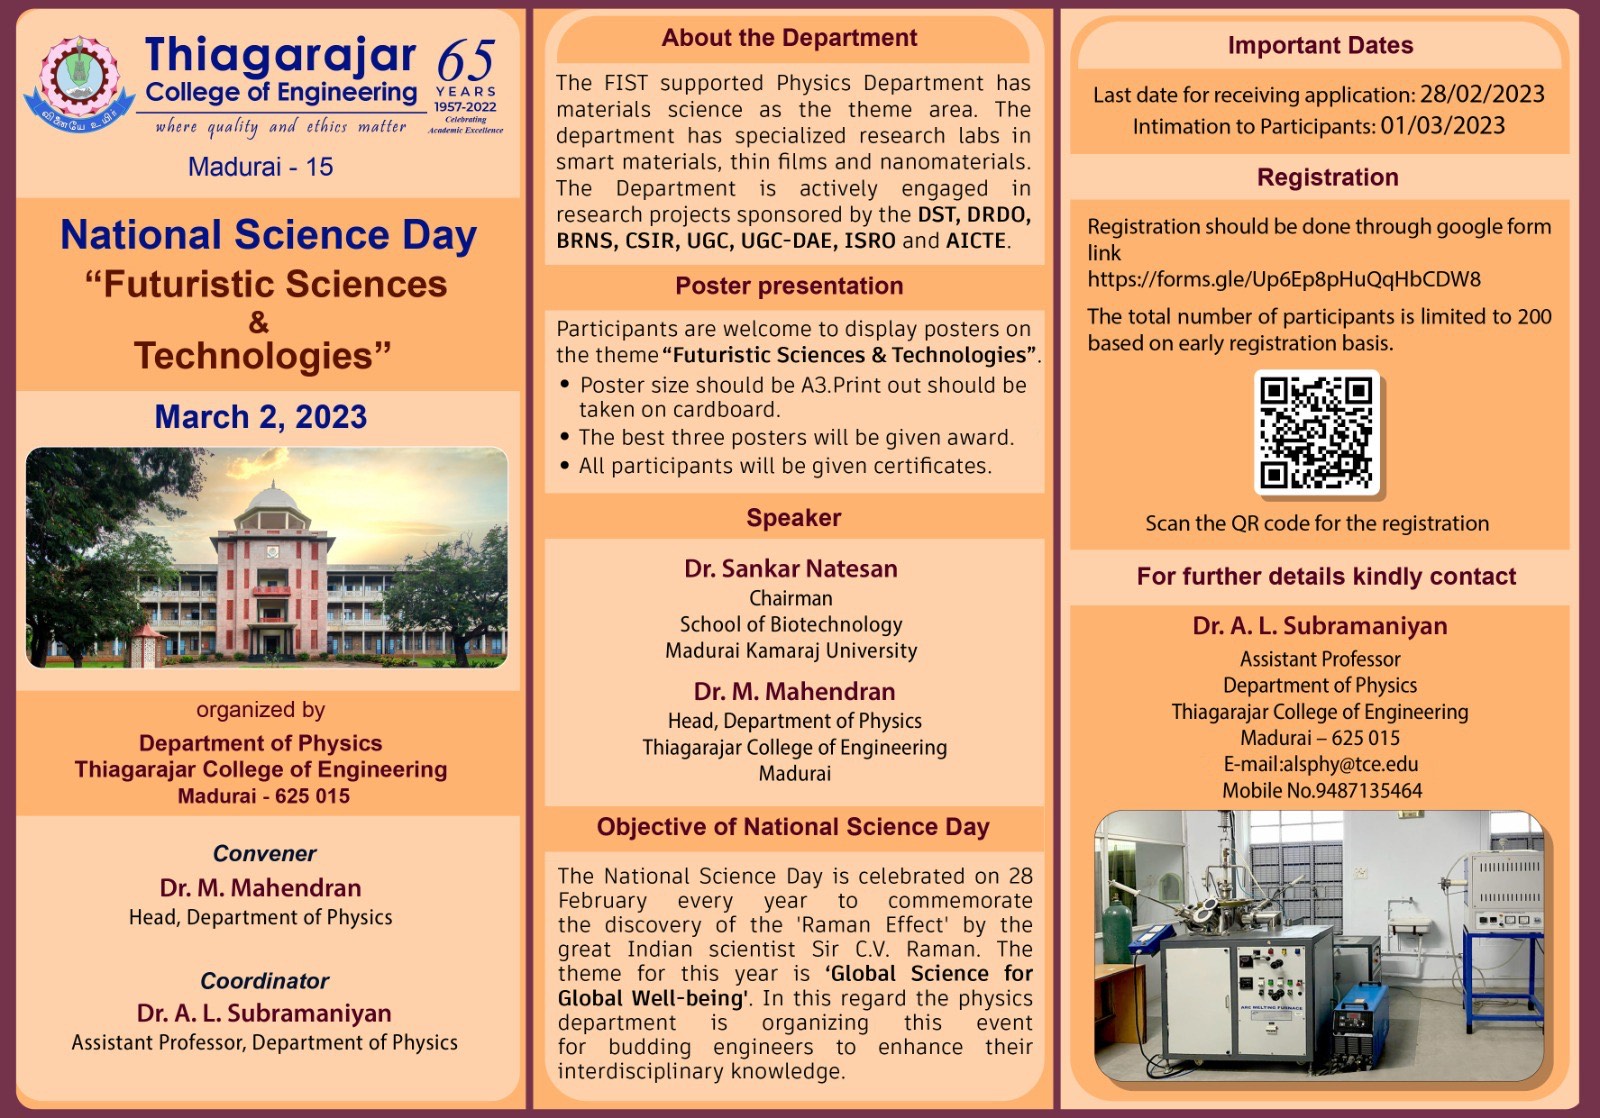 National Science Day Futuristic Sciences and Technologies